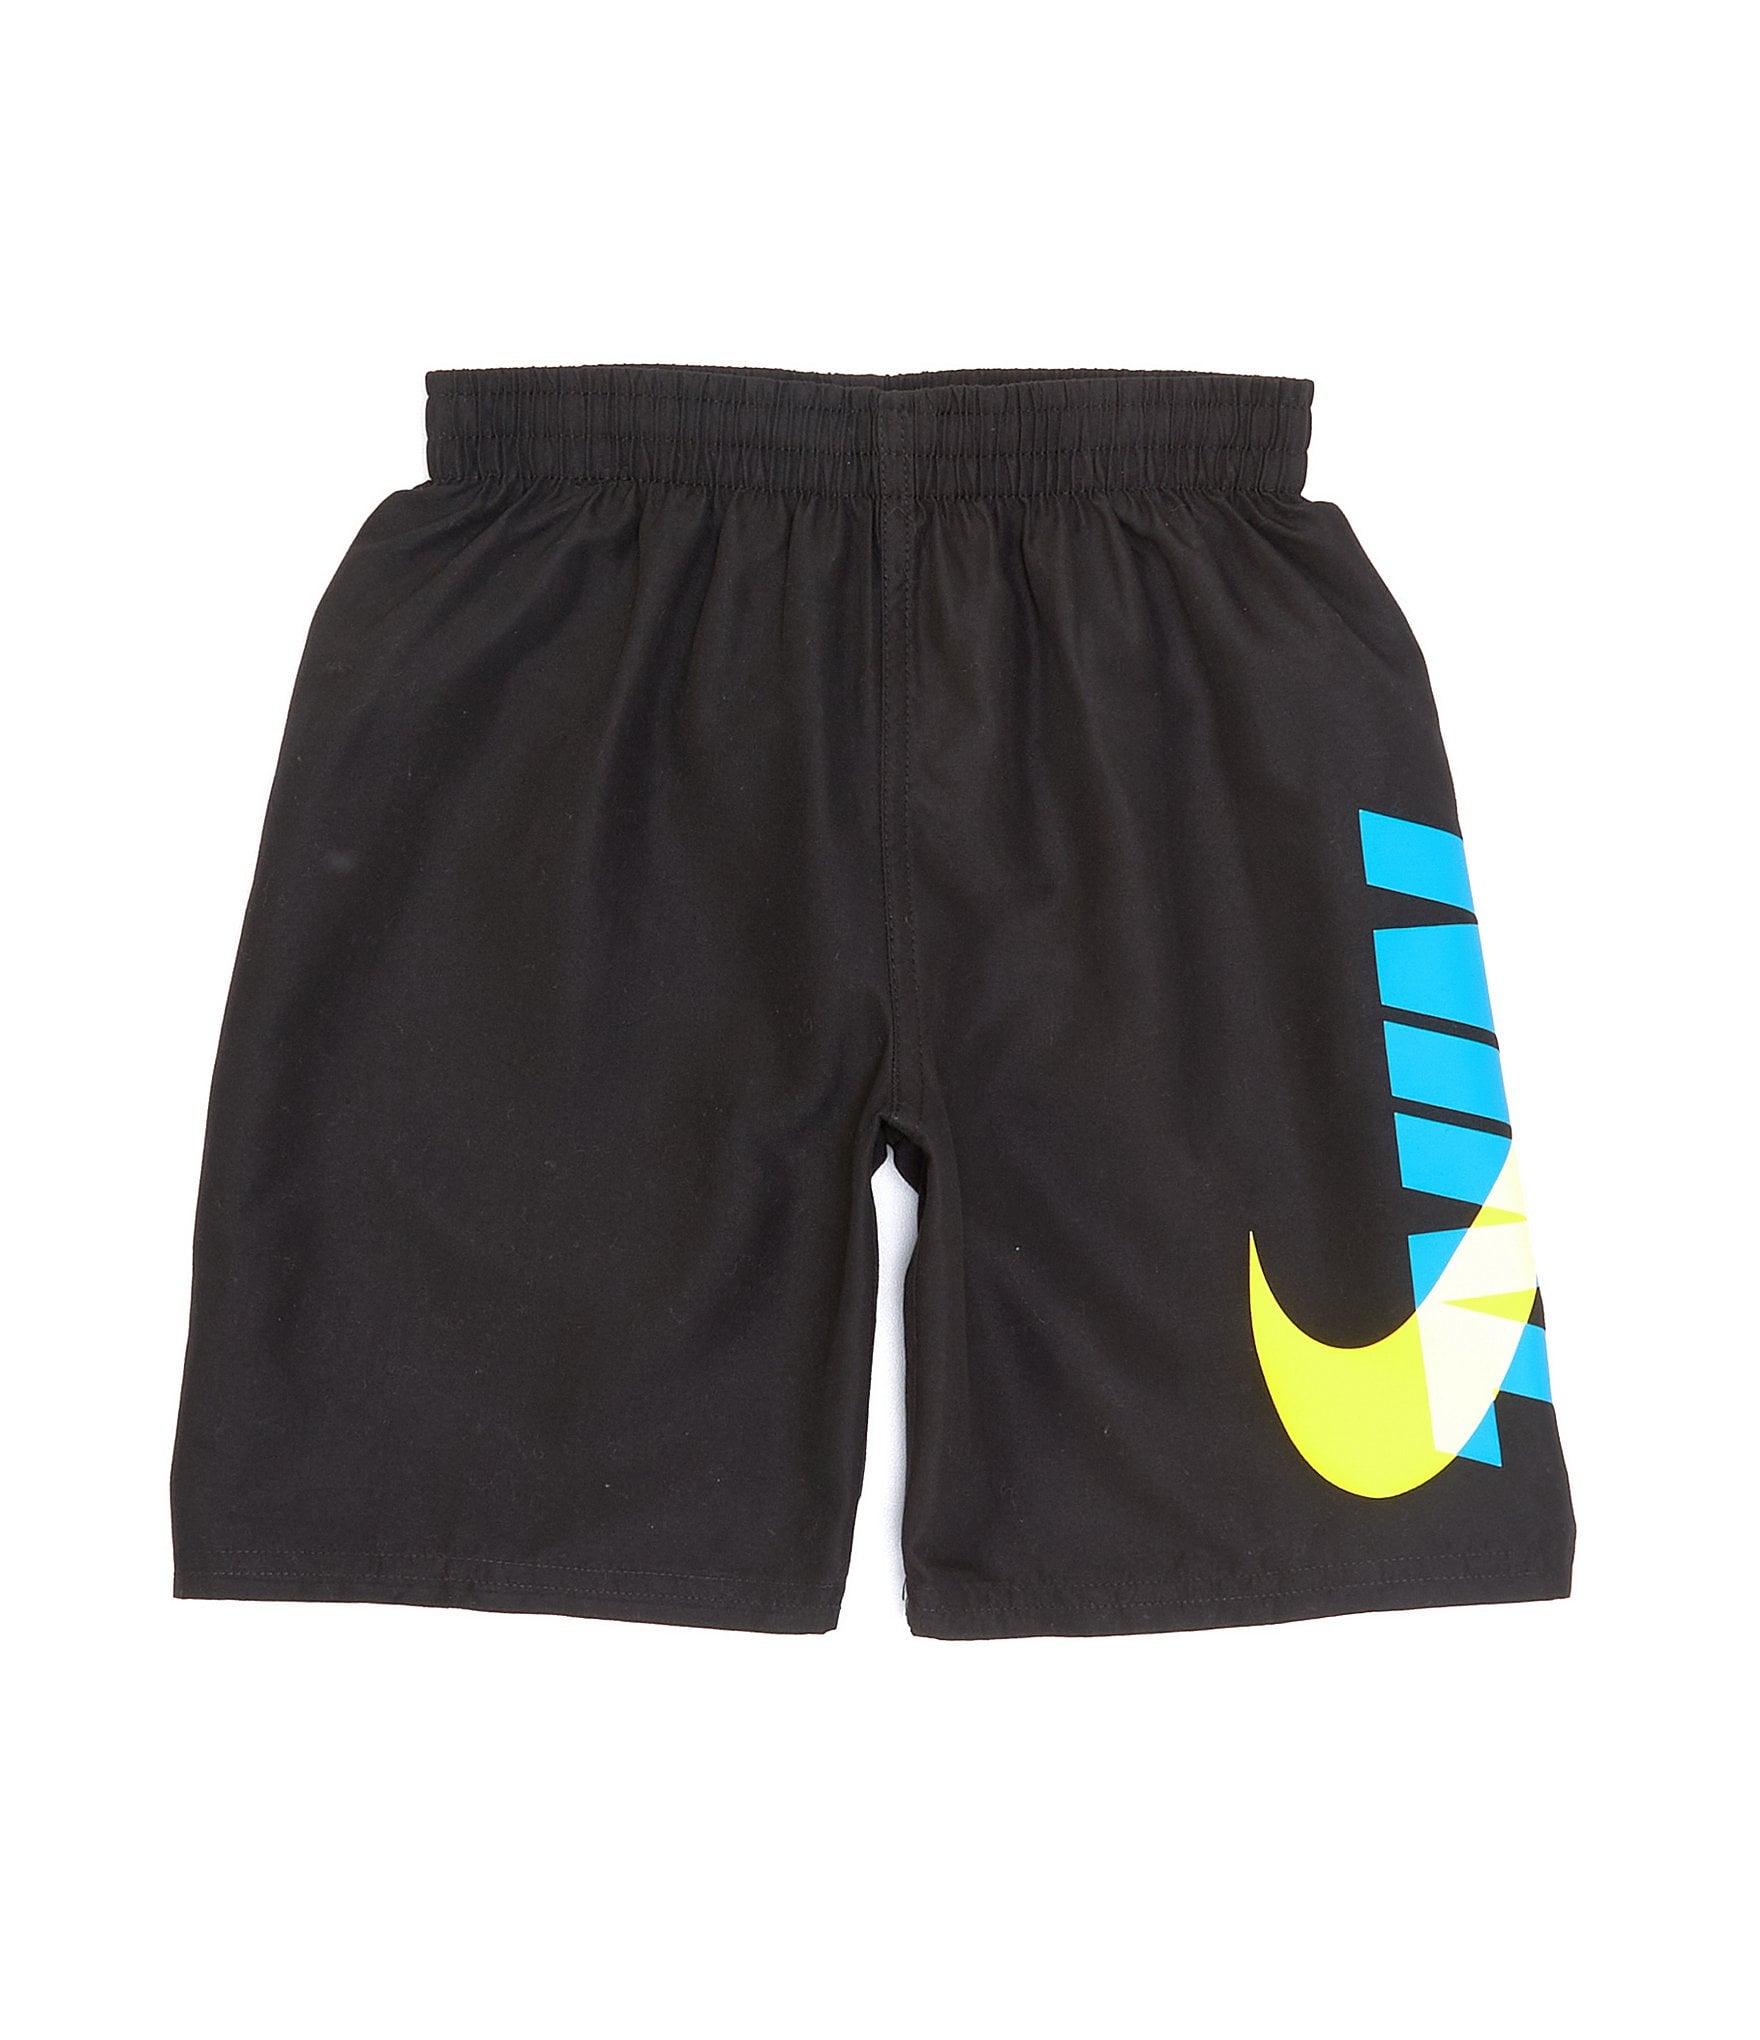 nike 7 swim trunks - OFF-53% >Free Delivery